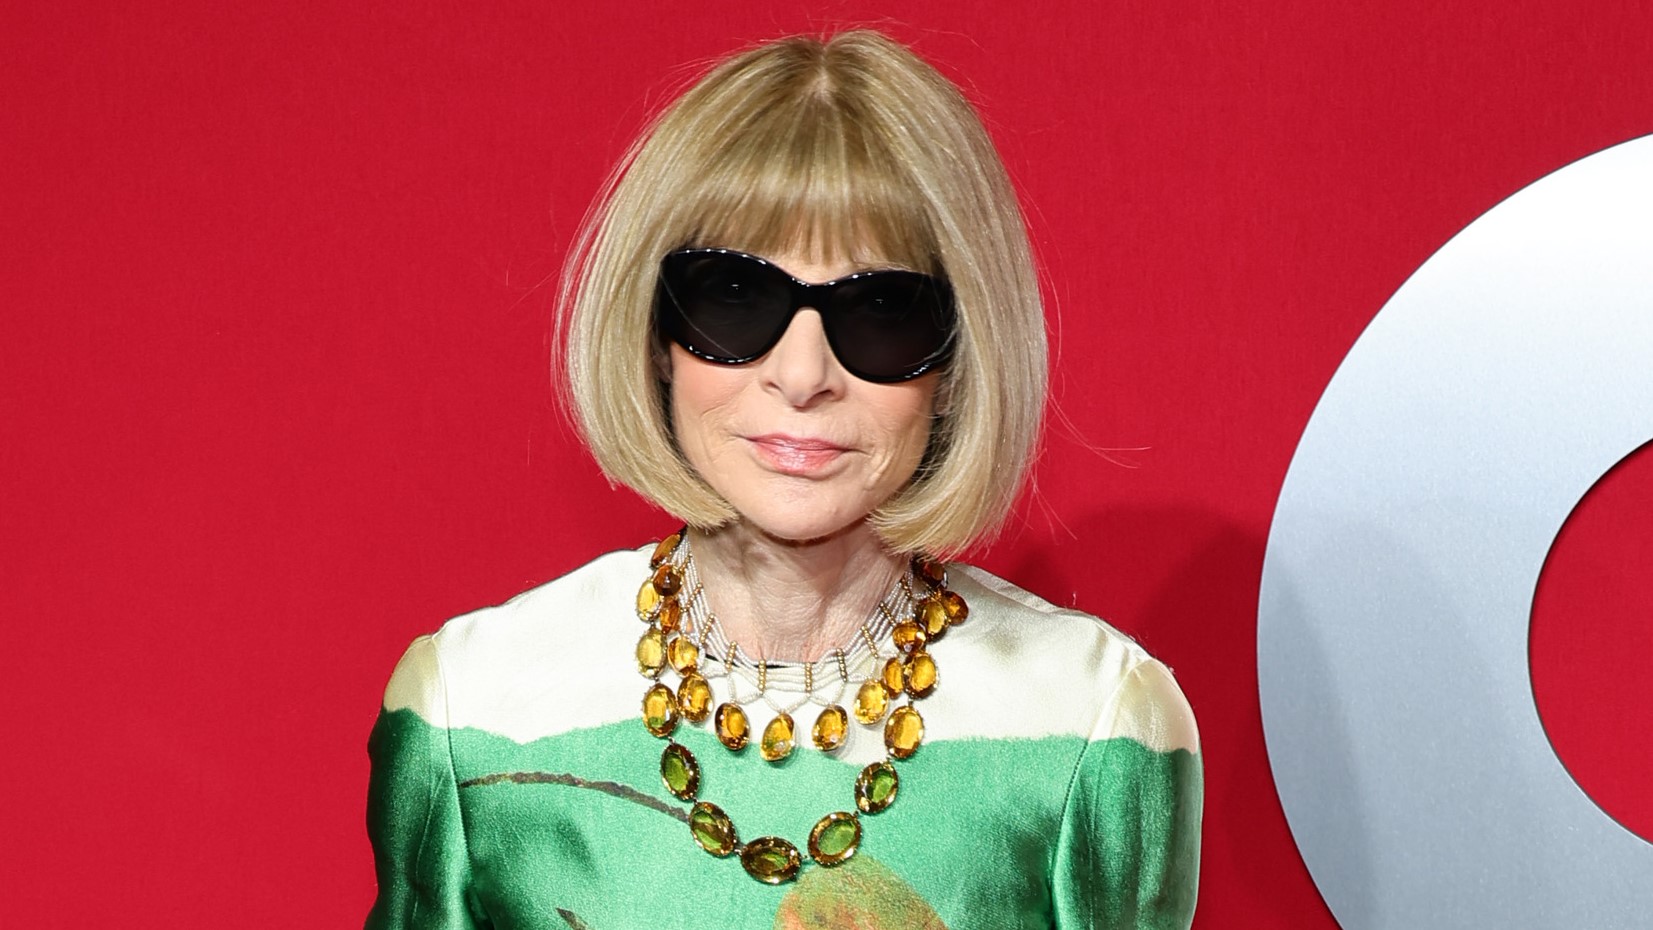 anna wintour kept her sunglasses on the entire time she was telling pitchfork staffers they were getting laid off, writer says